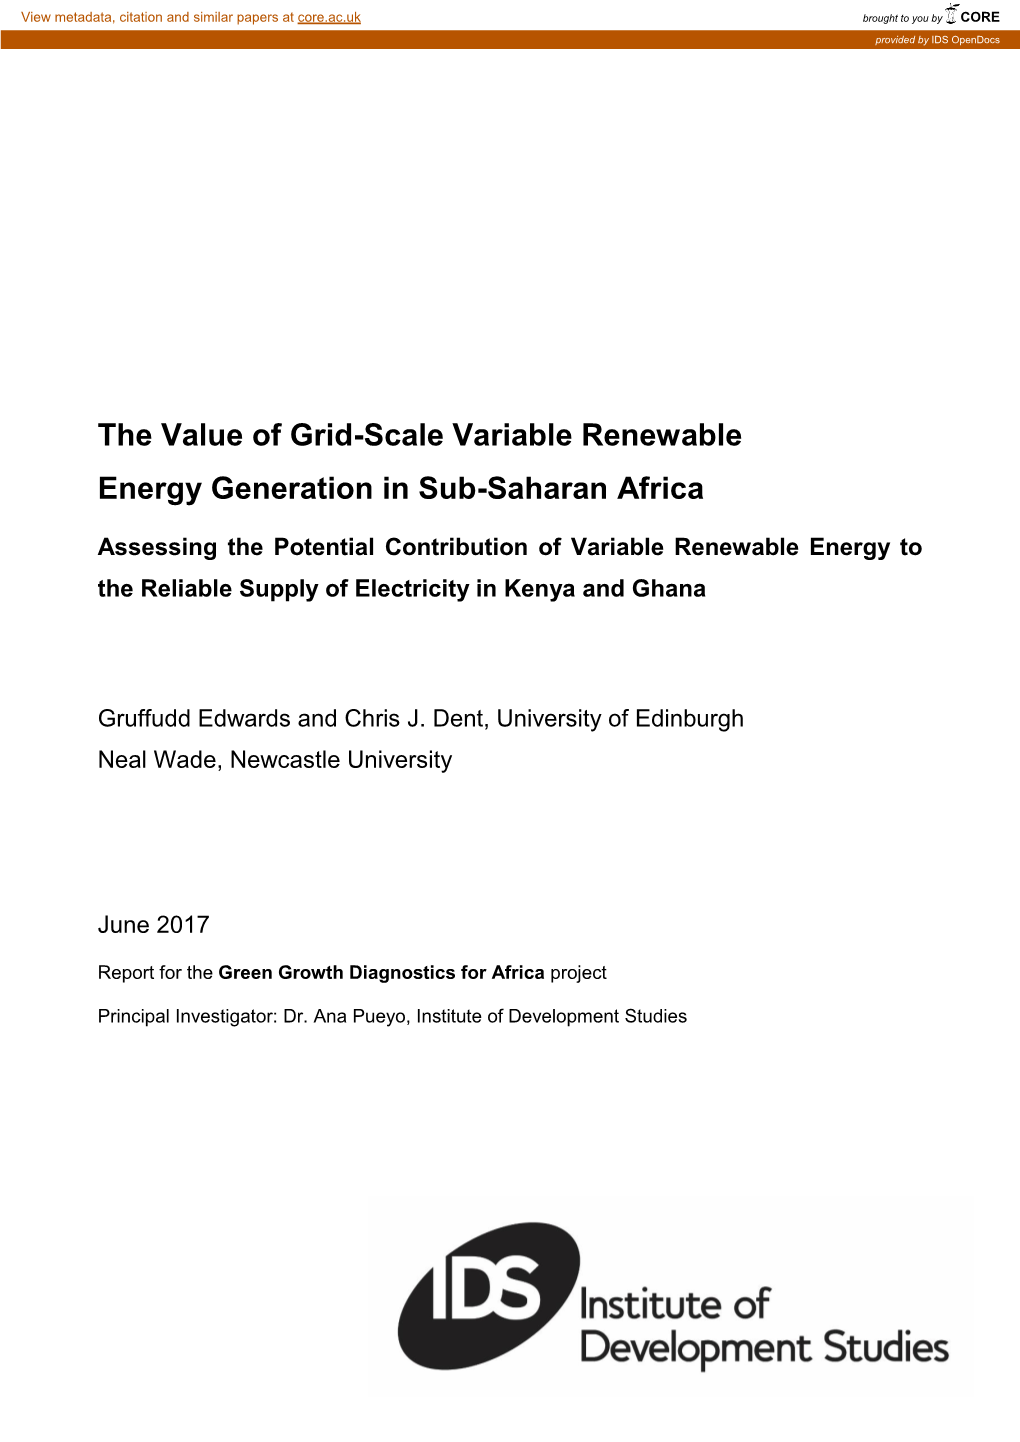 The Value of Grid-Scale Variable Renewable Energy Generation in Sub-Saharan Africa